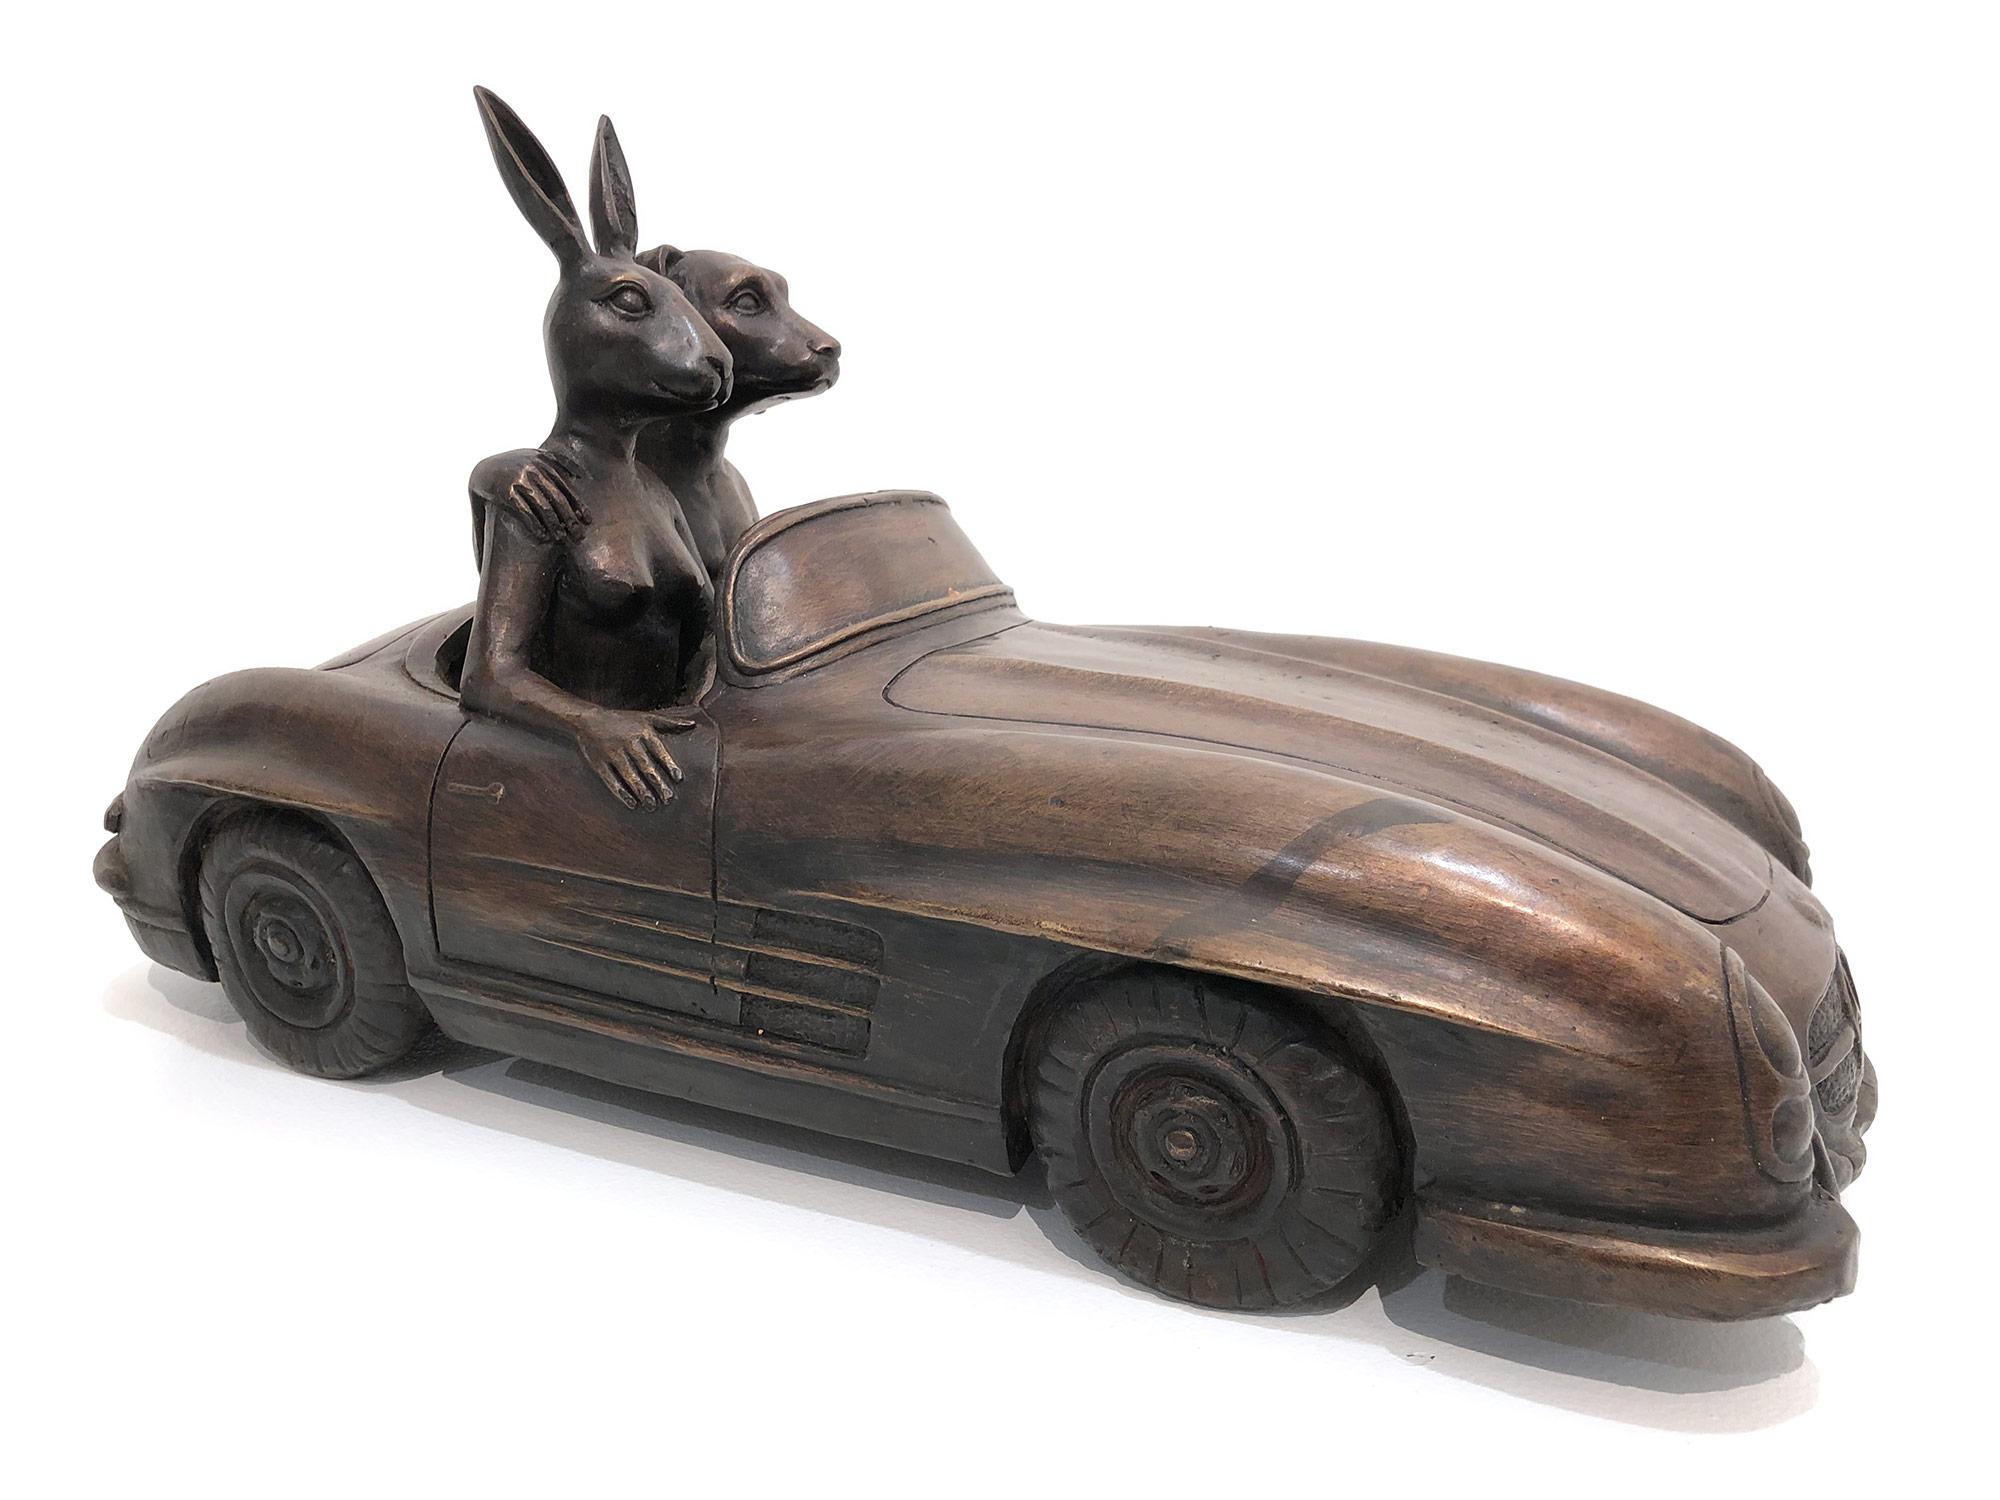 A Merc is a Rabbit and Dogs' Best Friend - Abstract Expressionist Sculpture by Gillie and Marc Schattner